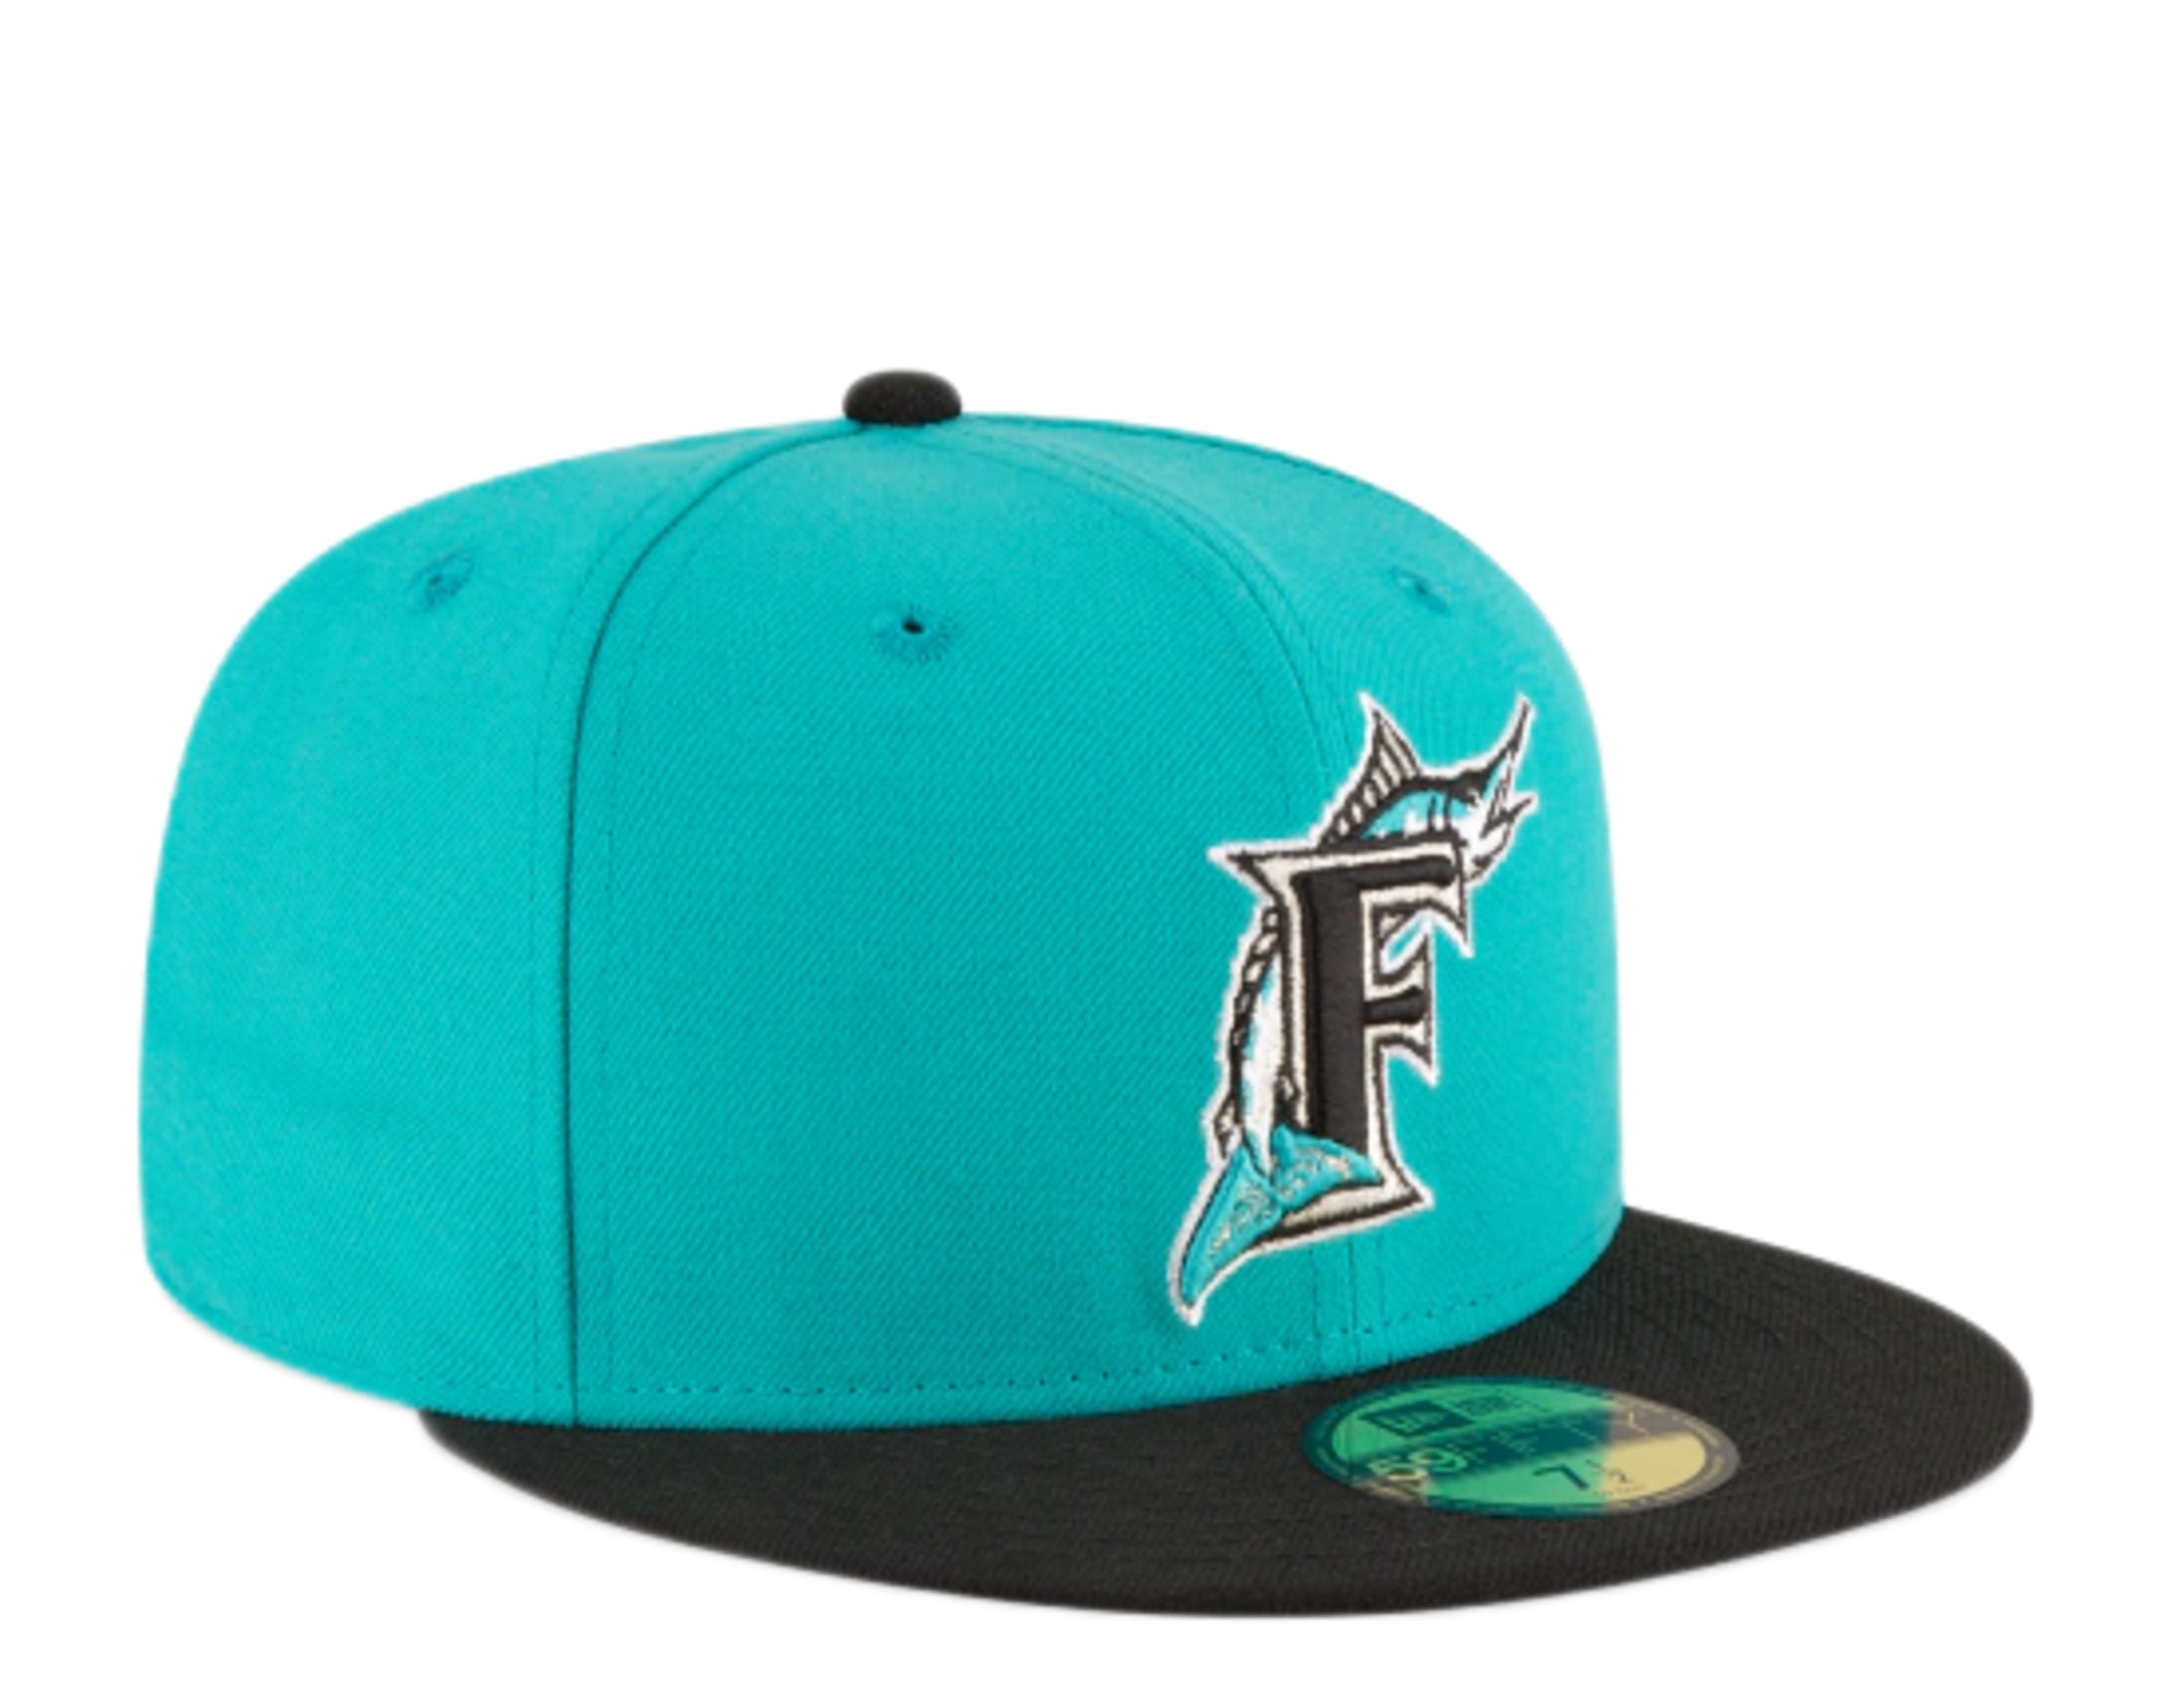 New Era 59FIFTY MLB Florida Marlins 1997 World Series Fitted Hat 7 1/2